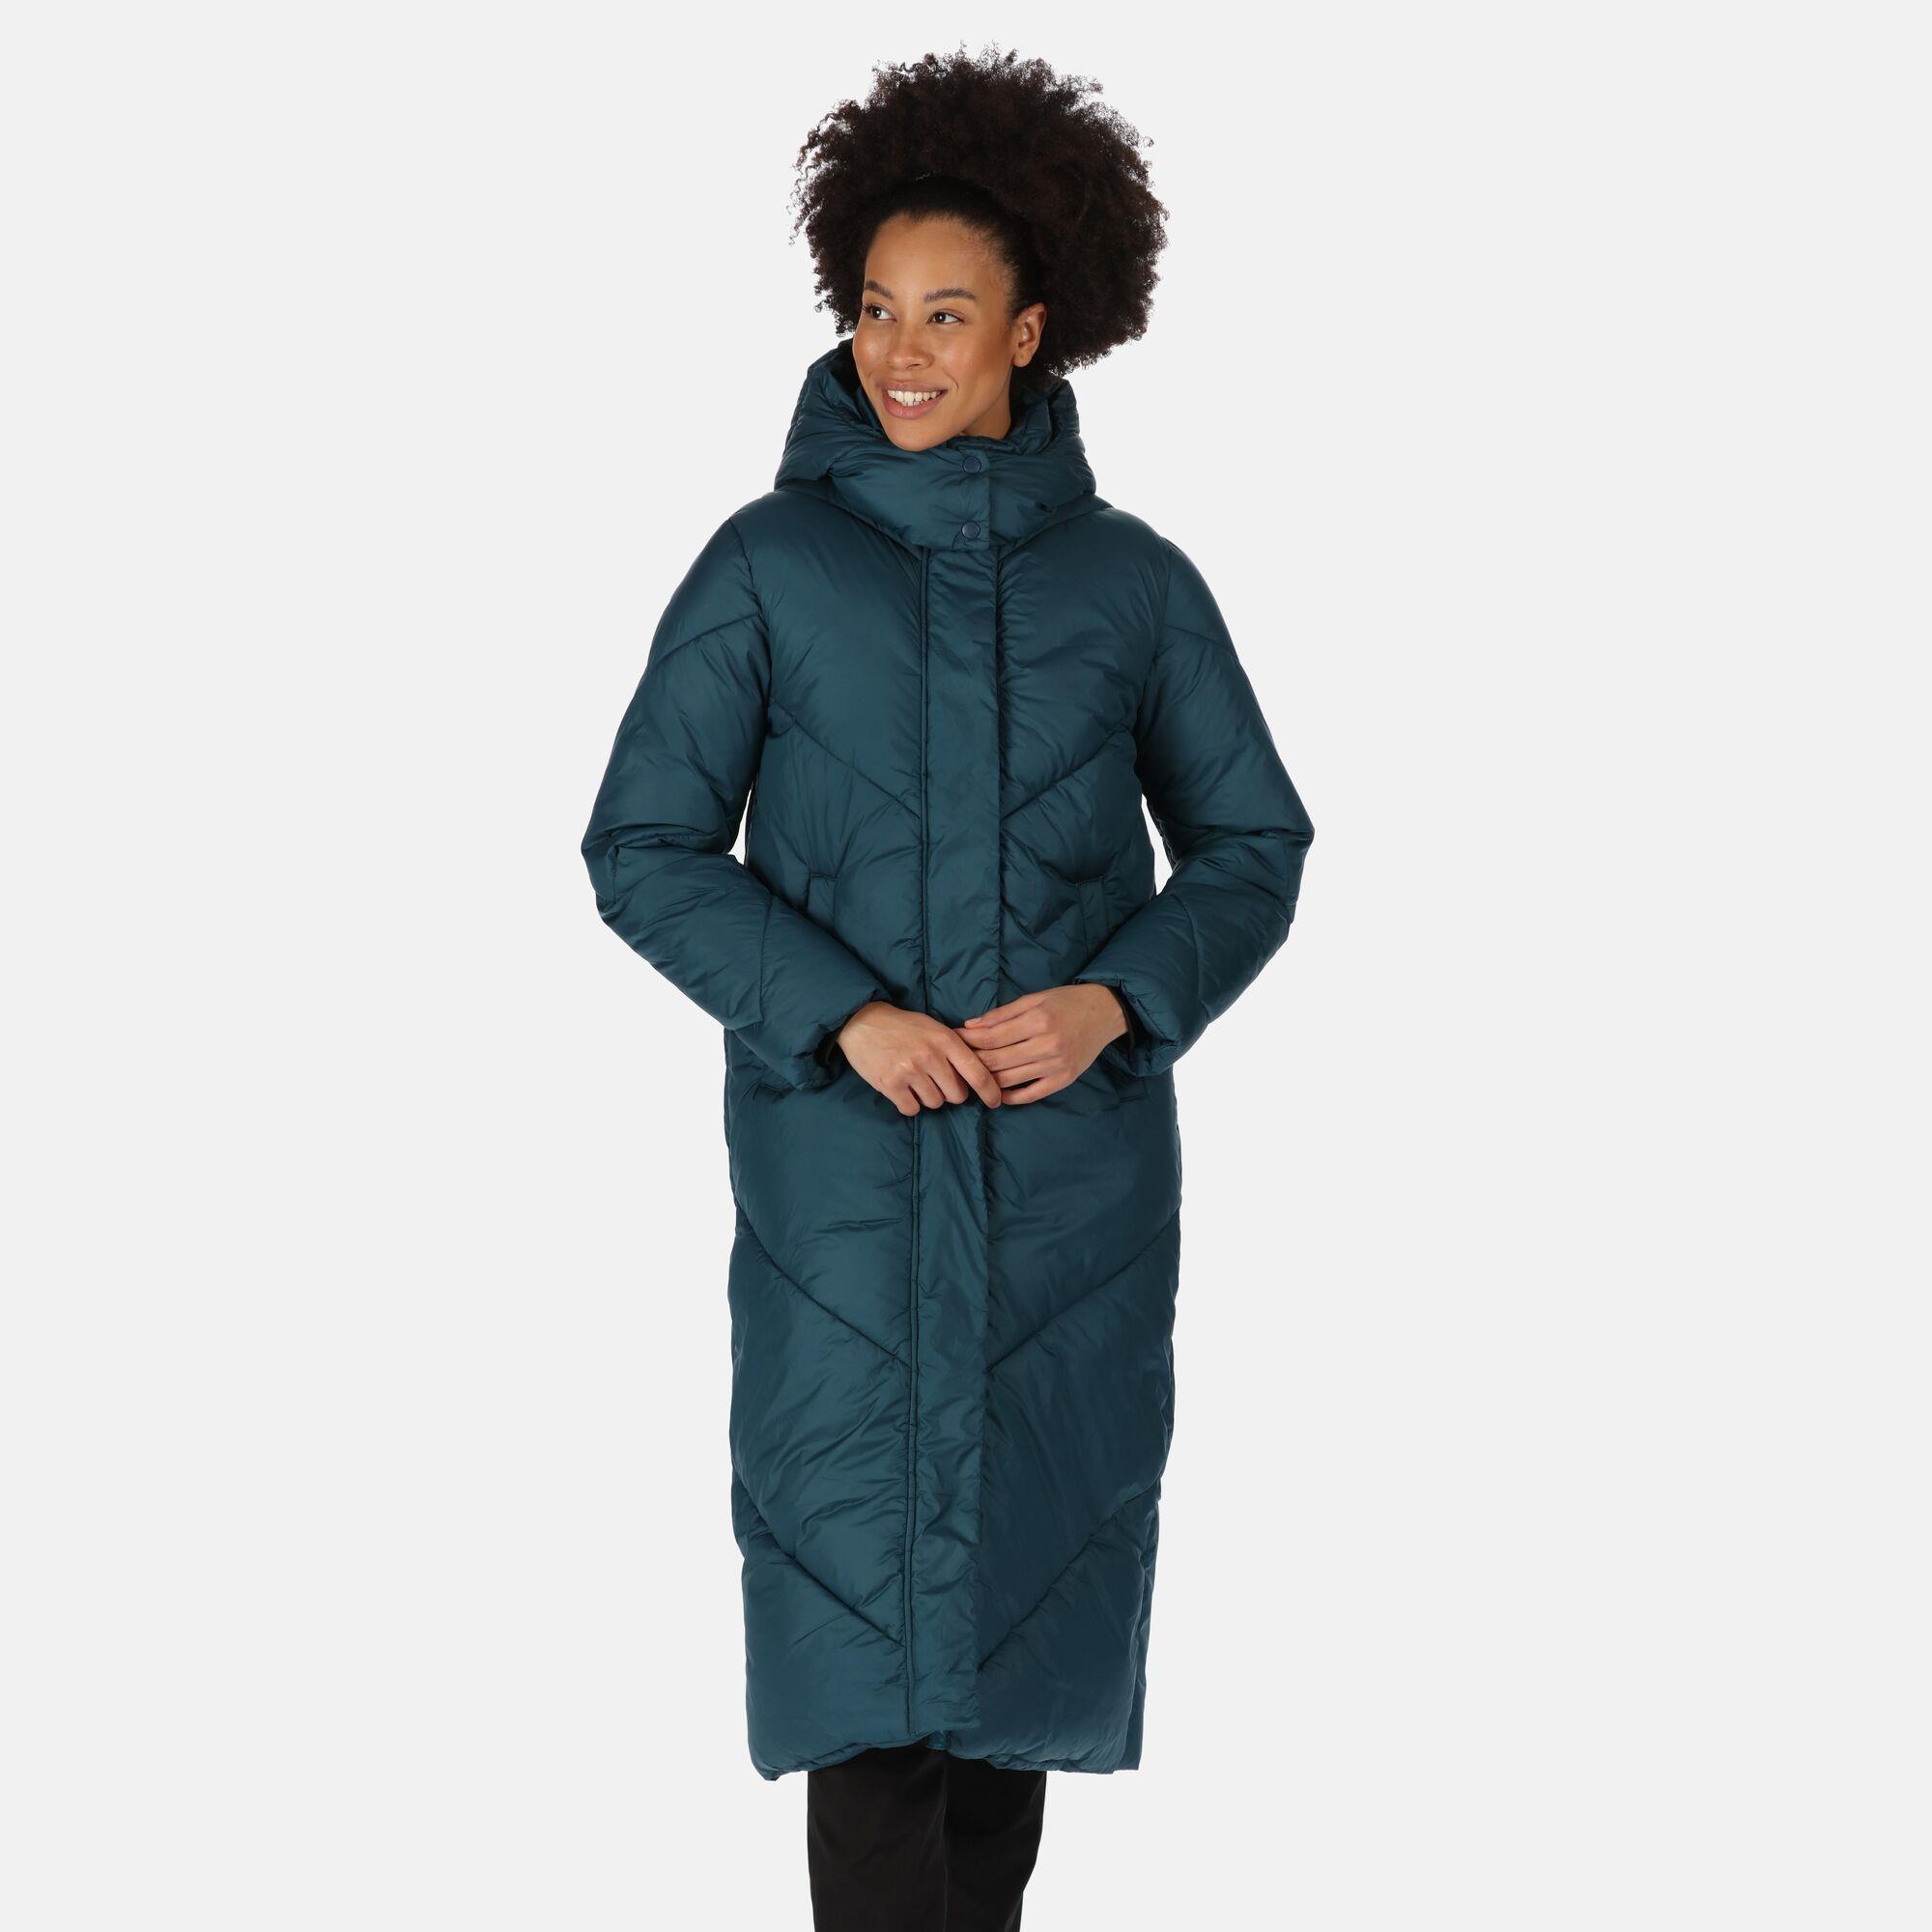 Regatta Womens Longley Quilted Longline Jacket Insulated Recycled | eBay